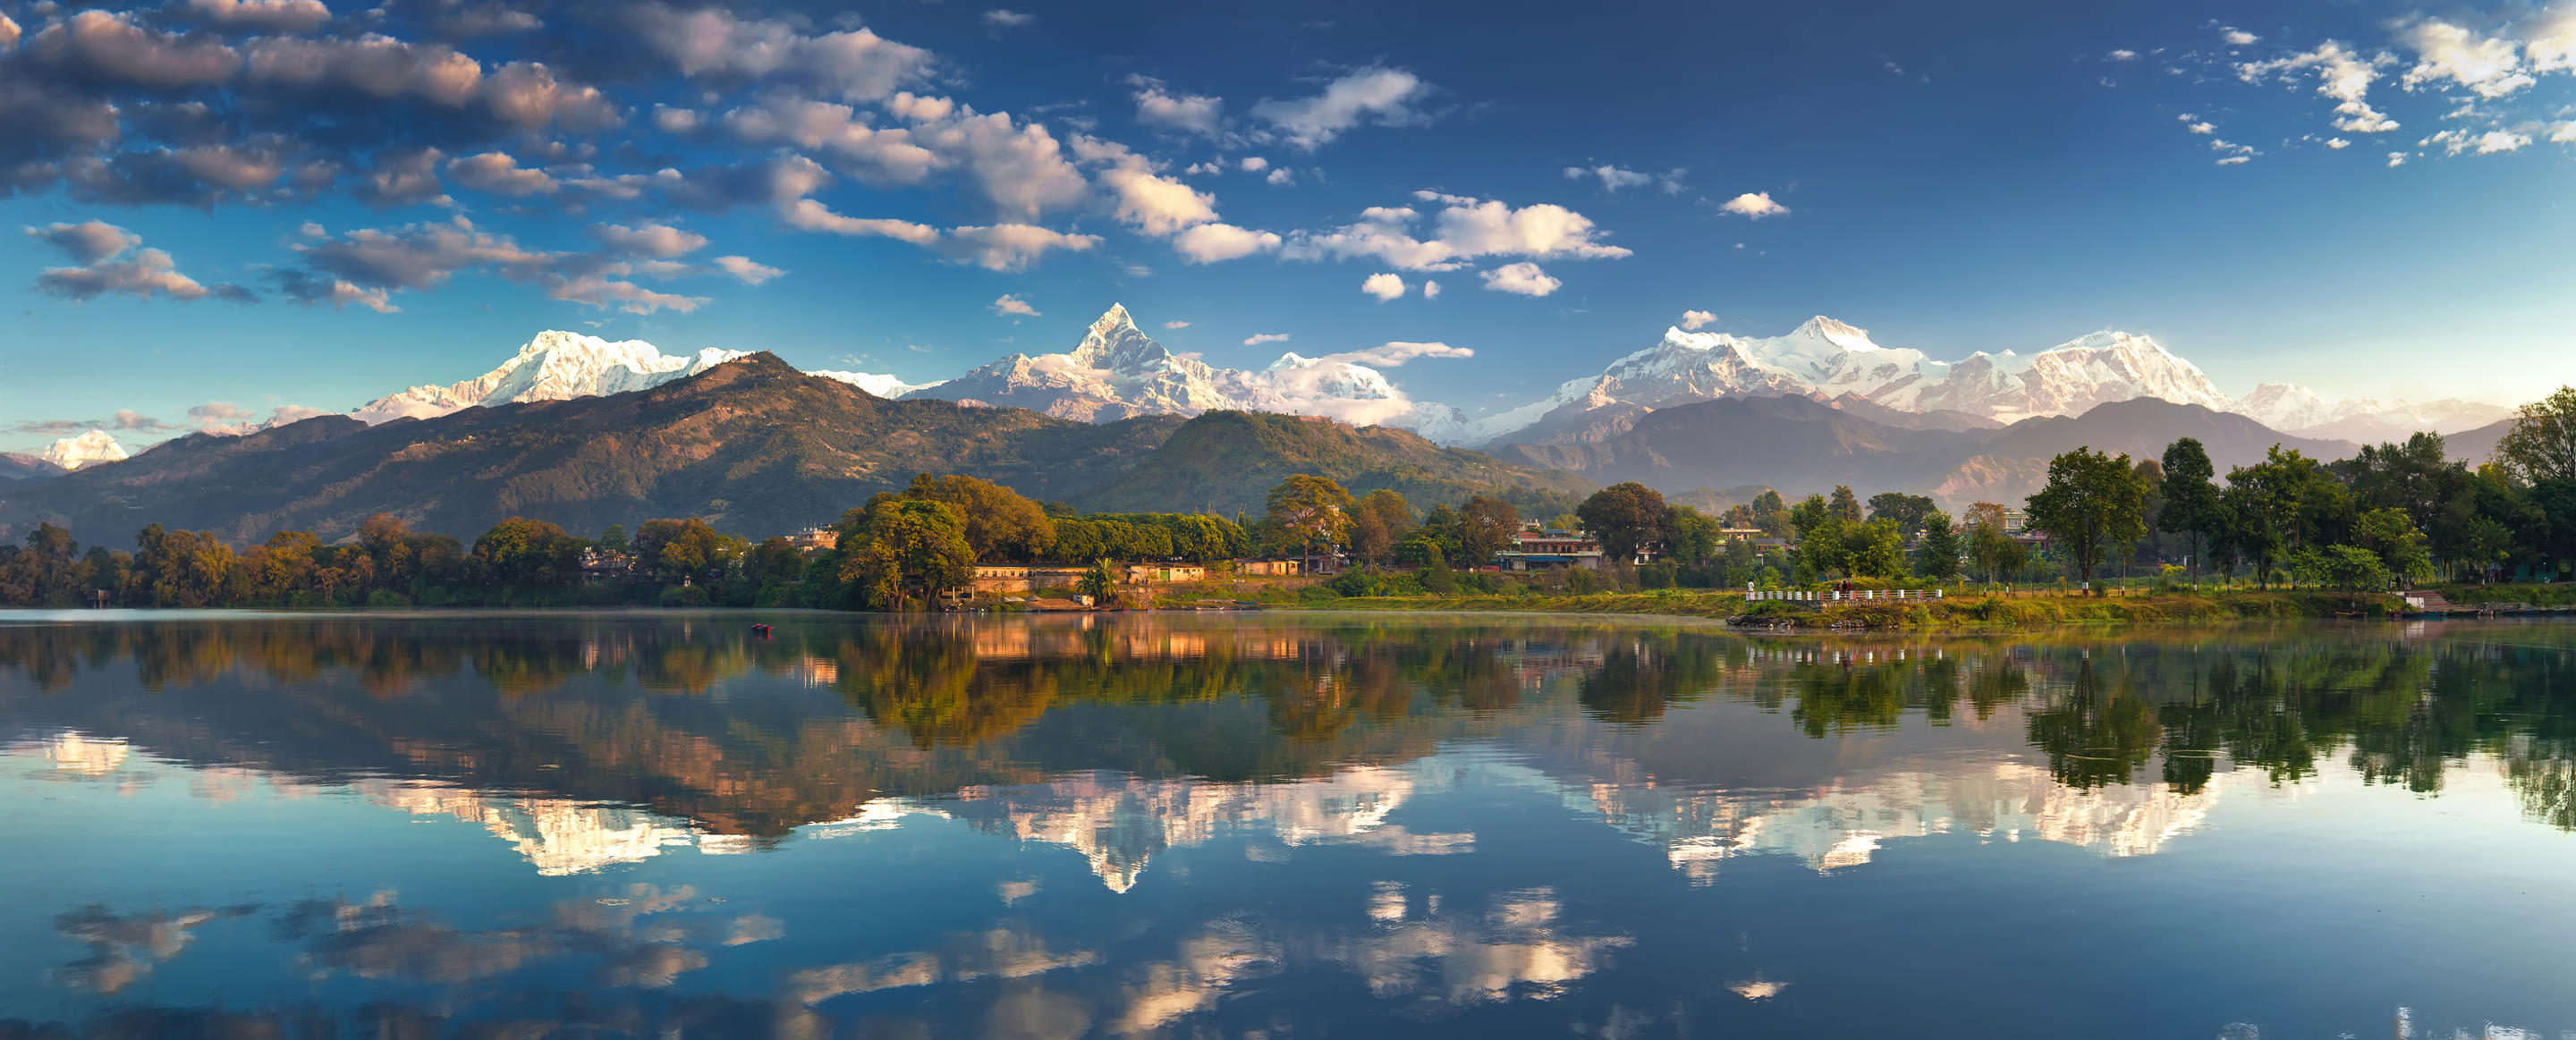 Things to Do in Pokhara